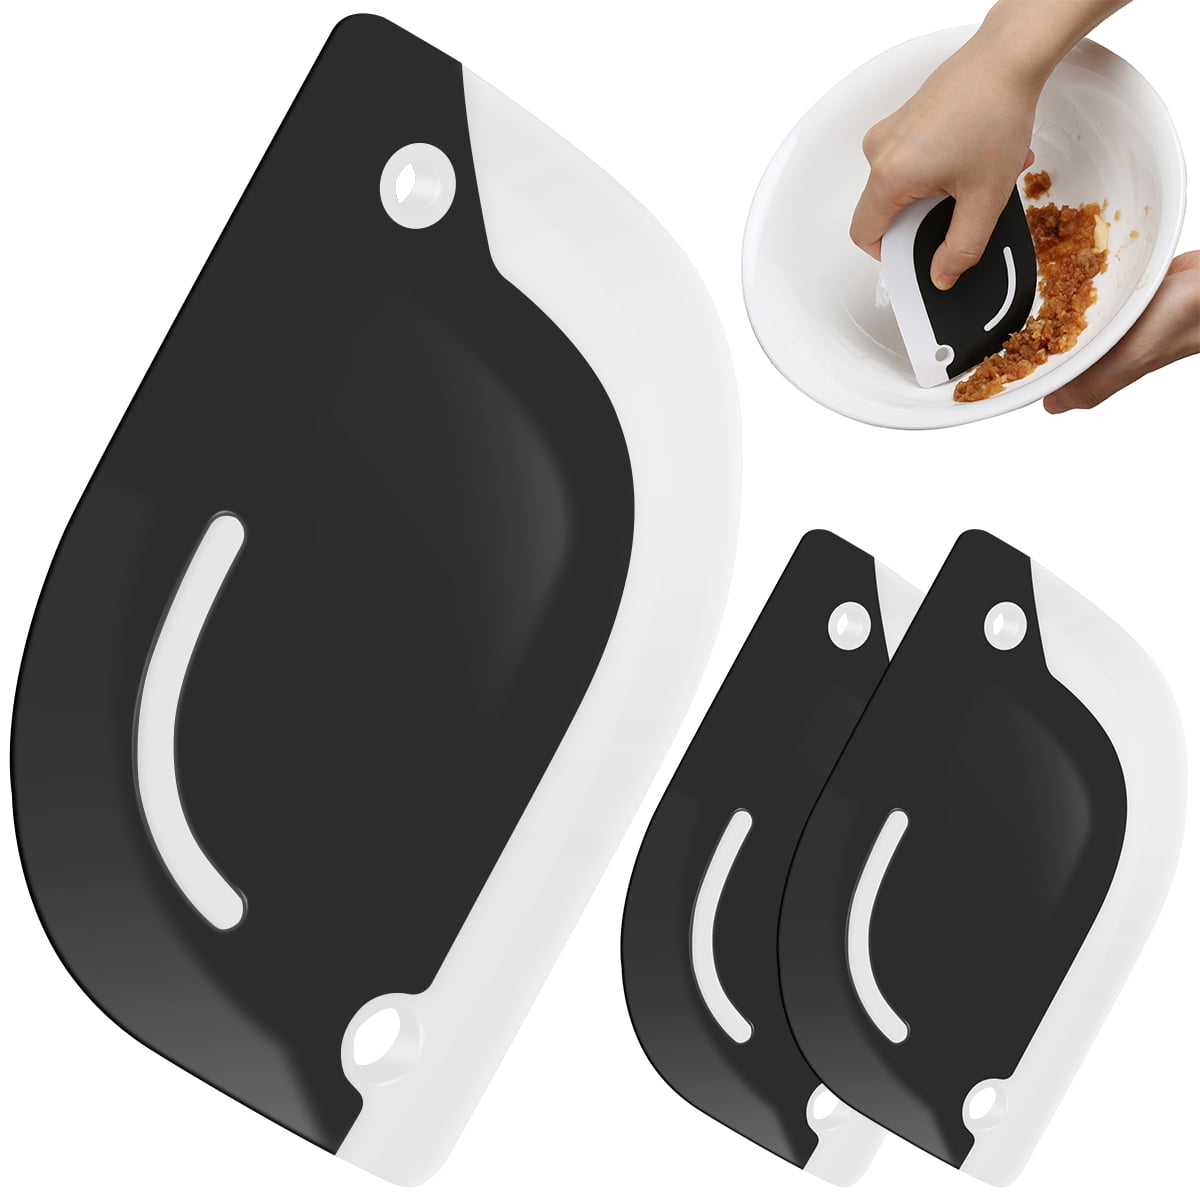 2 Pack Scraper Tool Kitchen, Sink Squeegee, Squeegee and